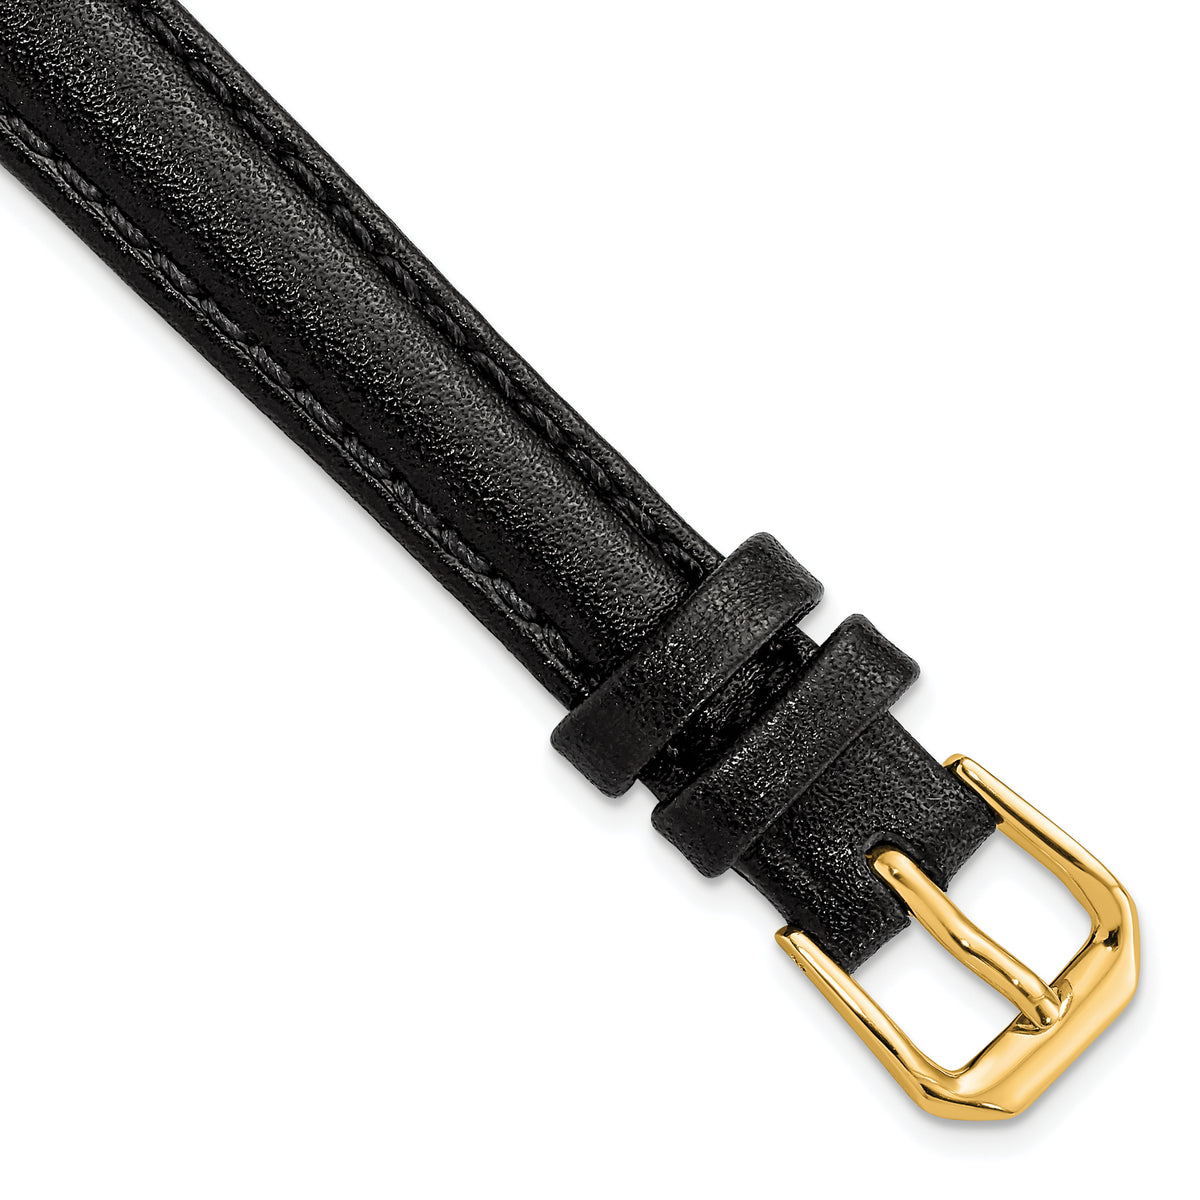 DeBeer 12mm Black Long Smooth Leather with Gold-tone Buckle 7.5 inch Watch Band